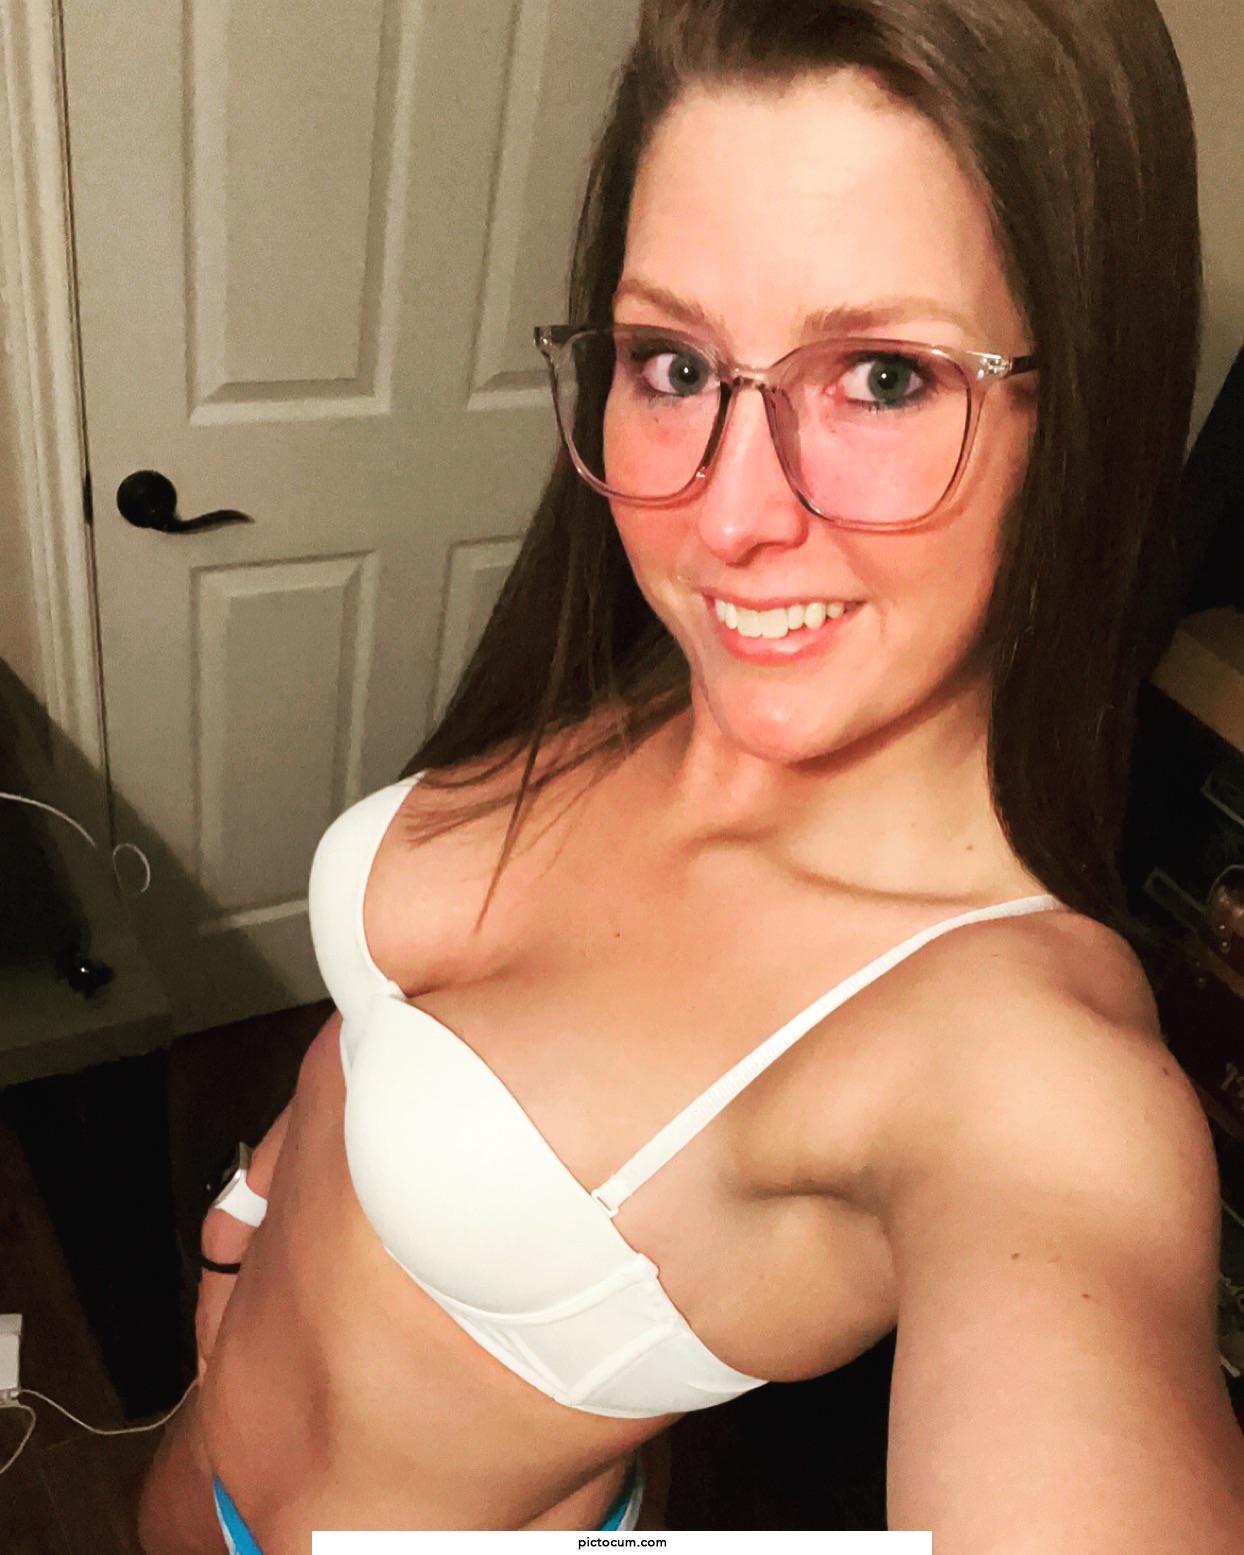 Nerdy girl is here for fun!